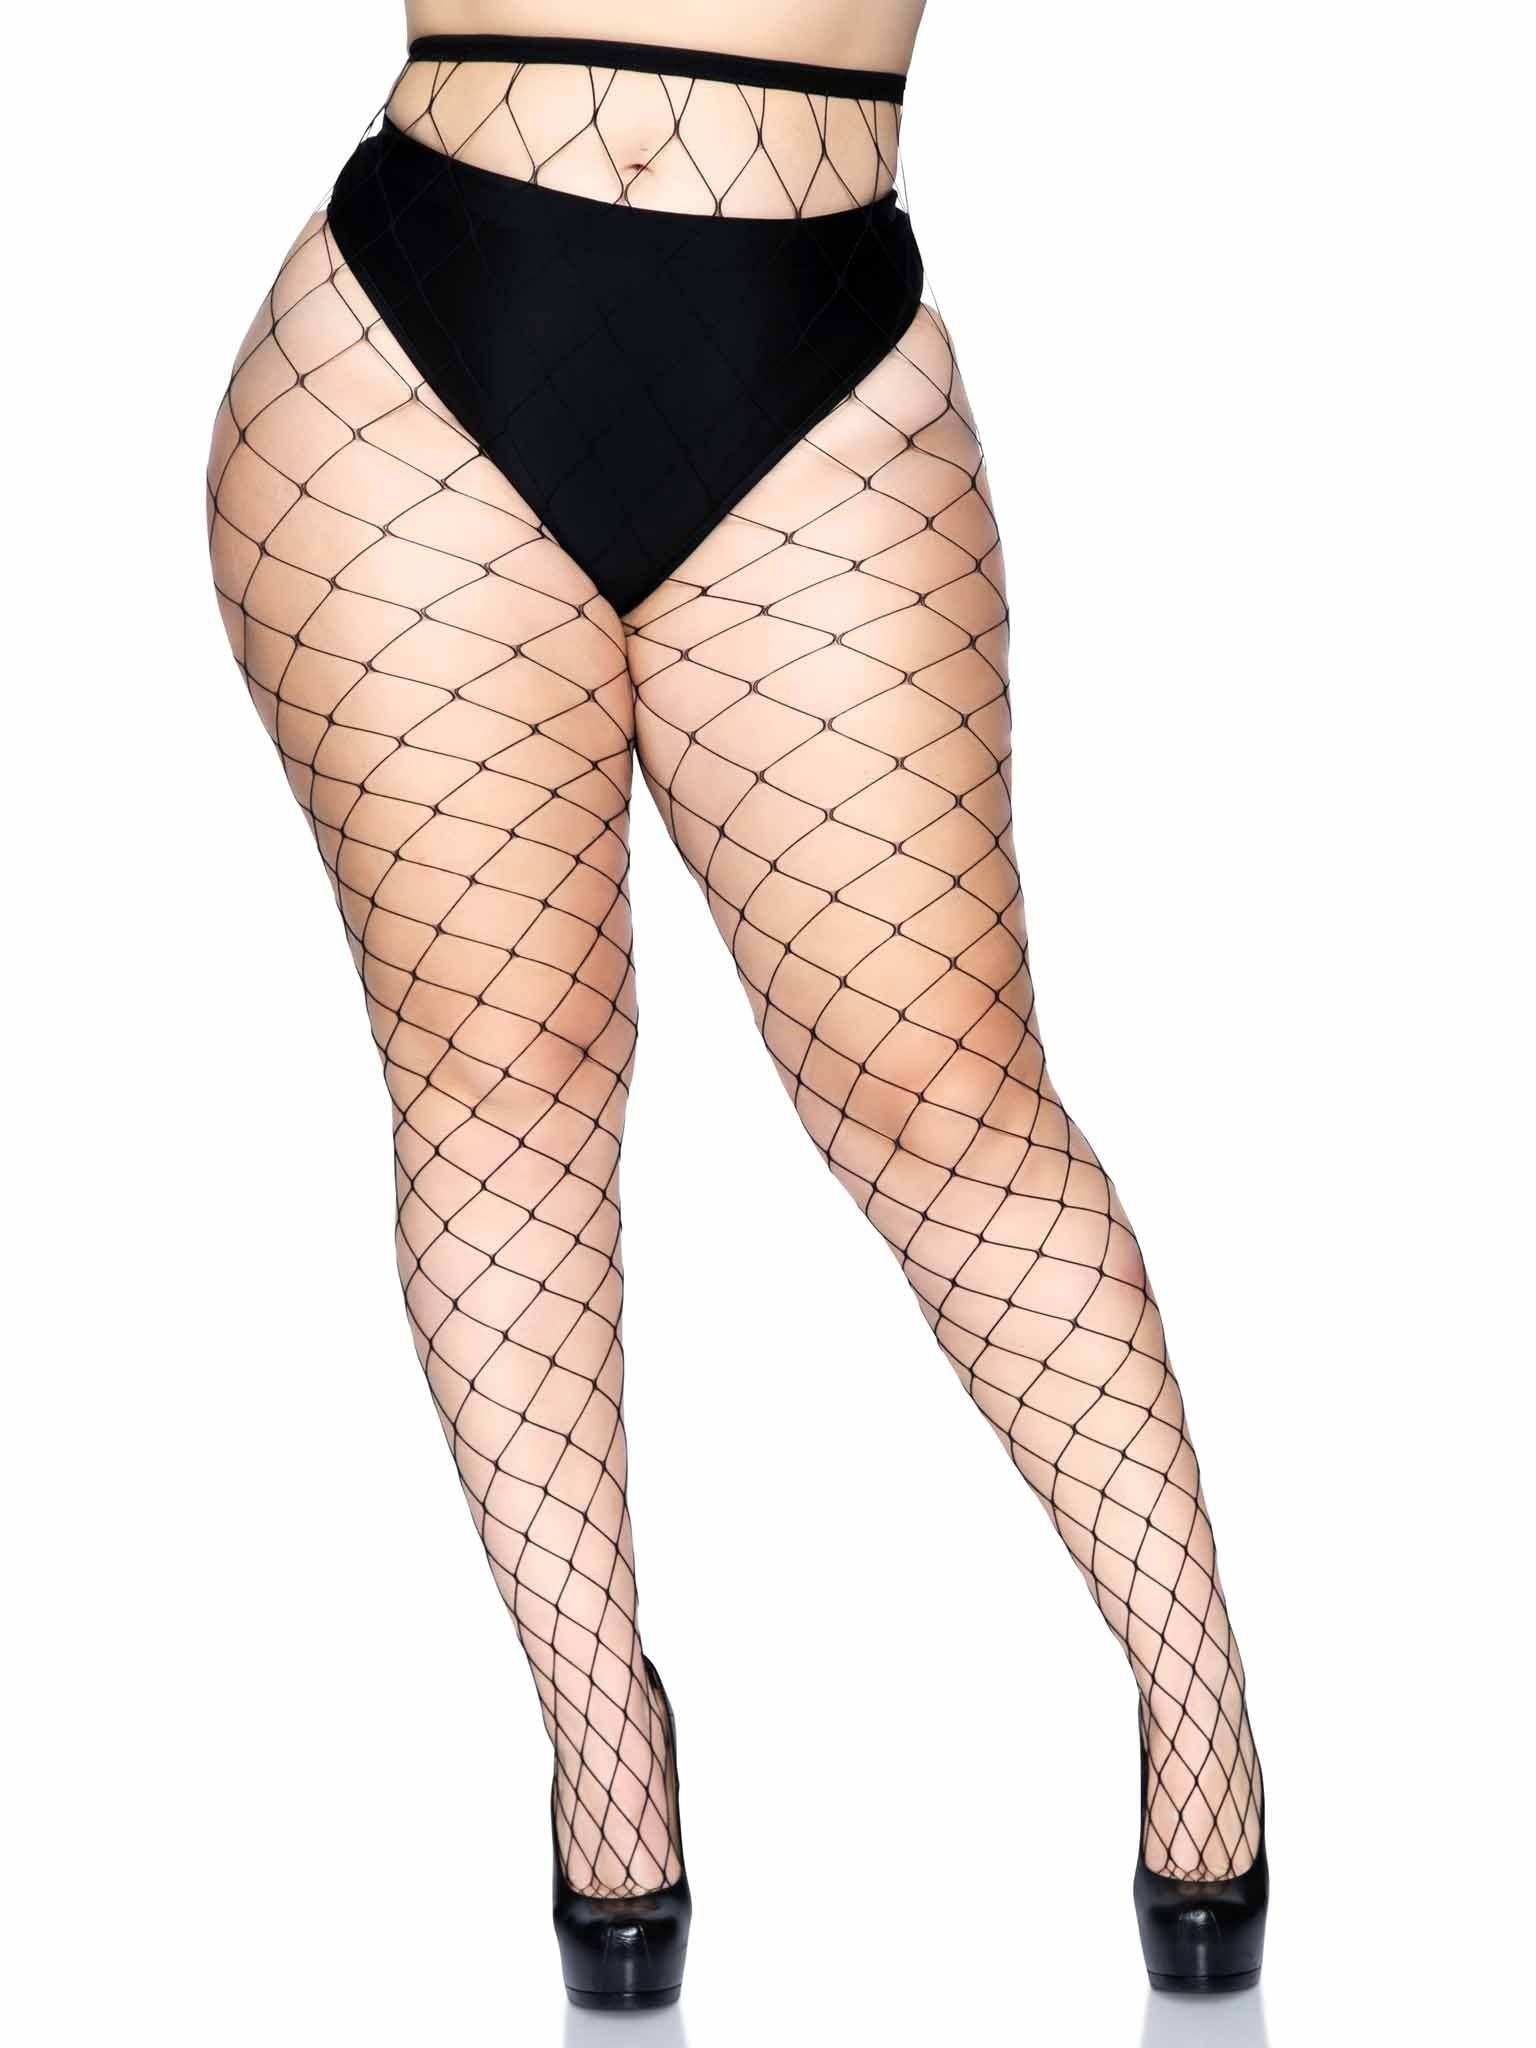 Fence Net Pantyhose - One Size and Queen Available-BestGSpot